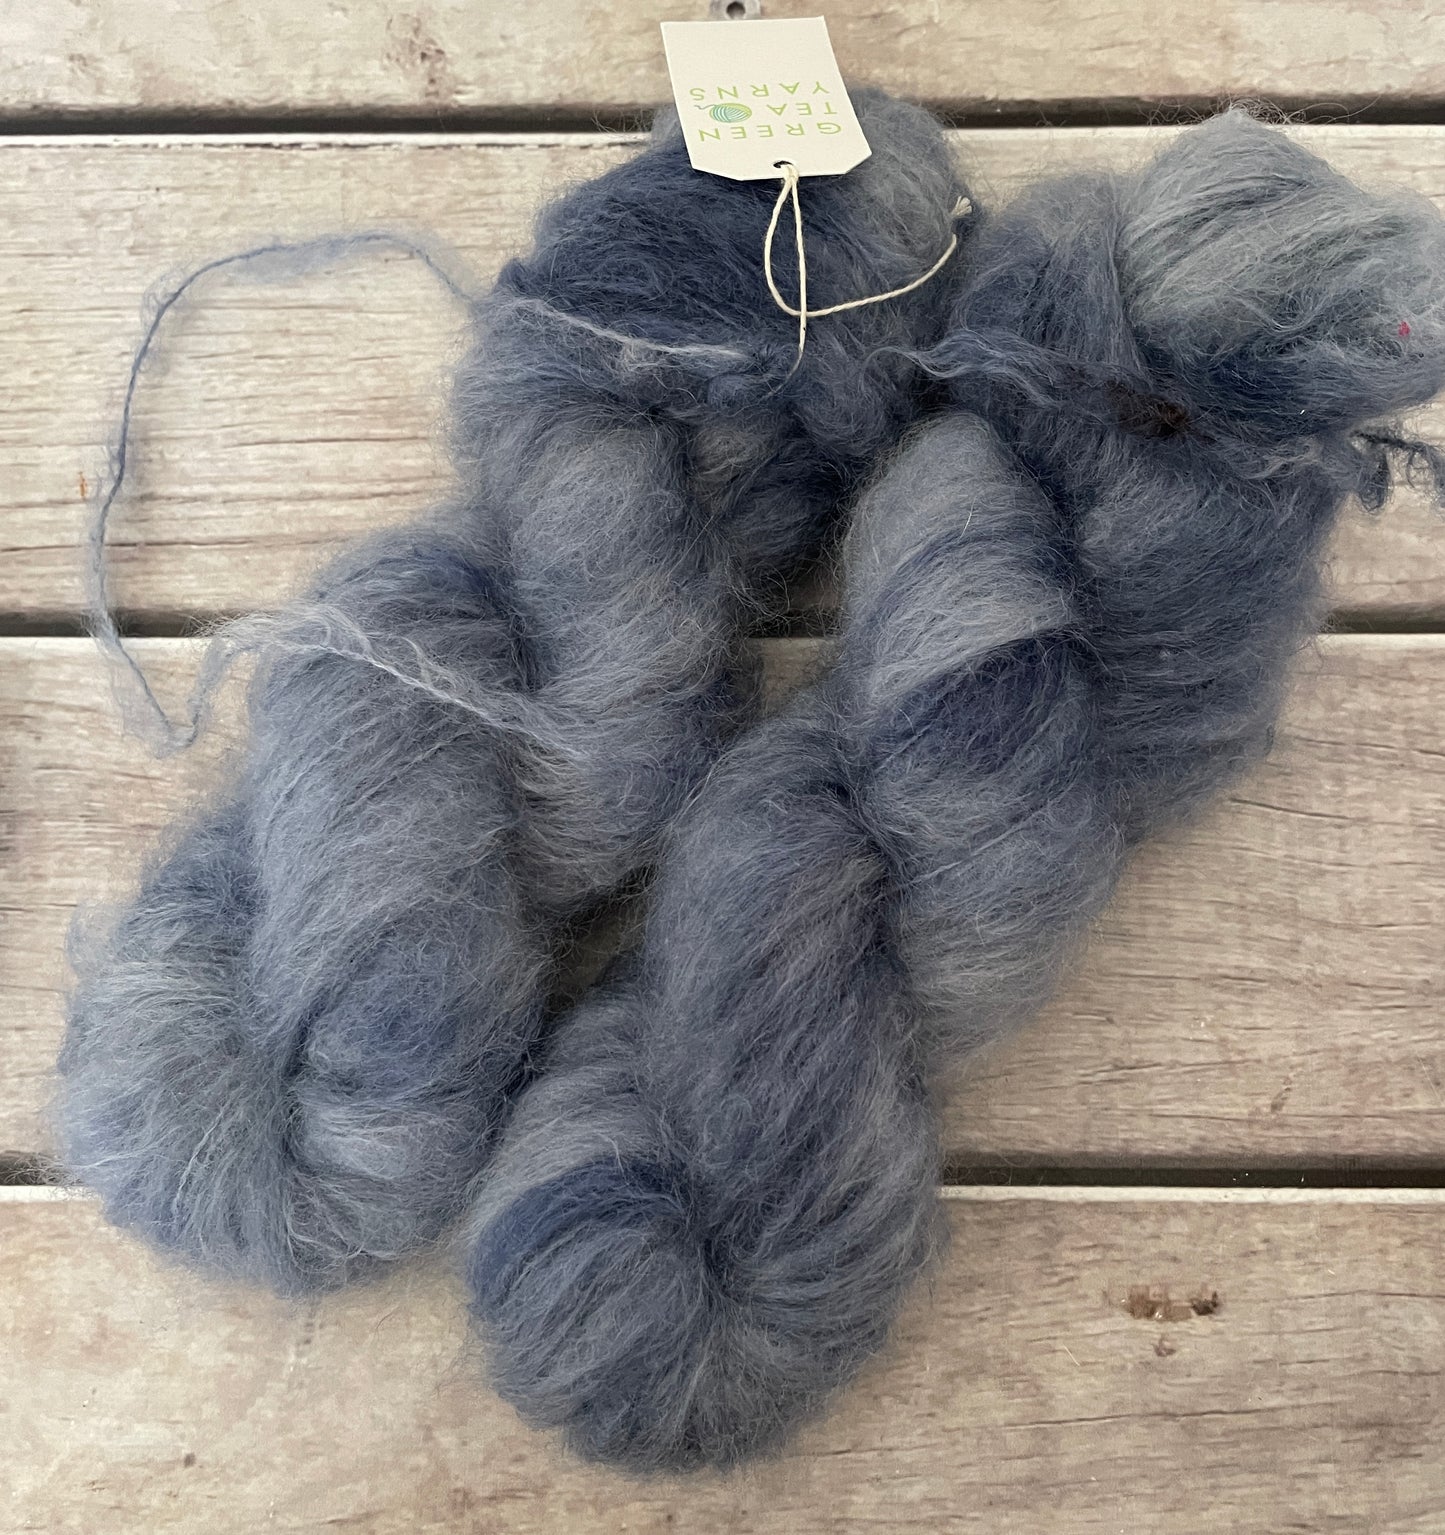 Nerves of Steel on Sage - Mohair and merino - 8 ply